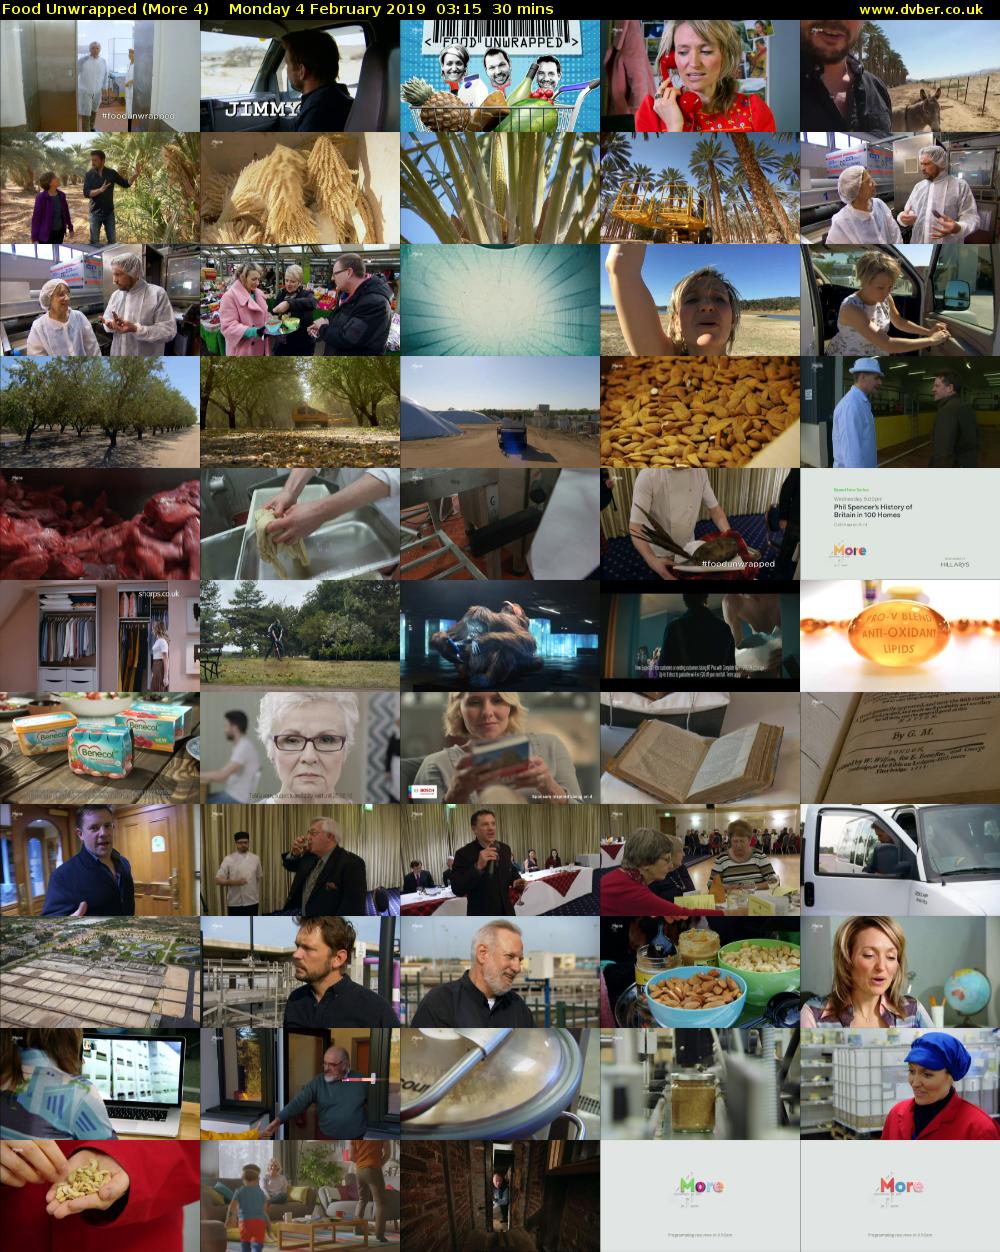 Food Unwrapped (More 4) Monday 4 February 2019 03:15 - 03:45